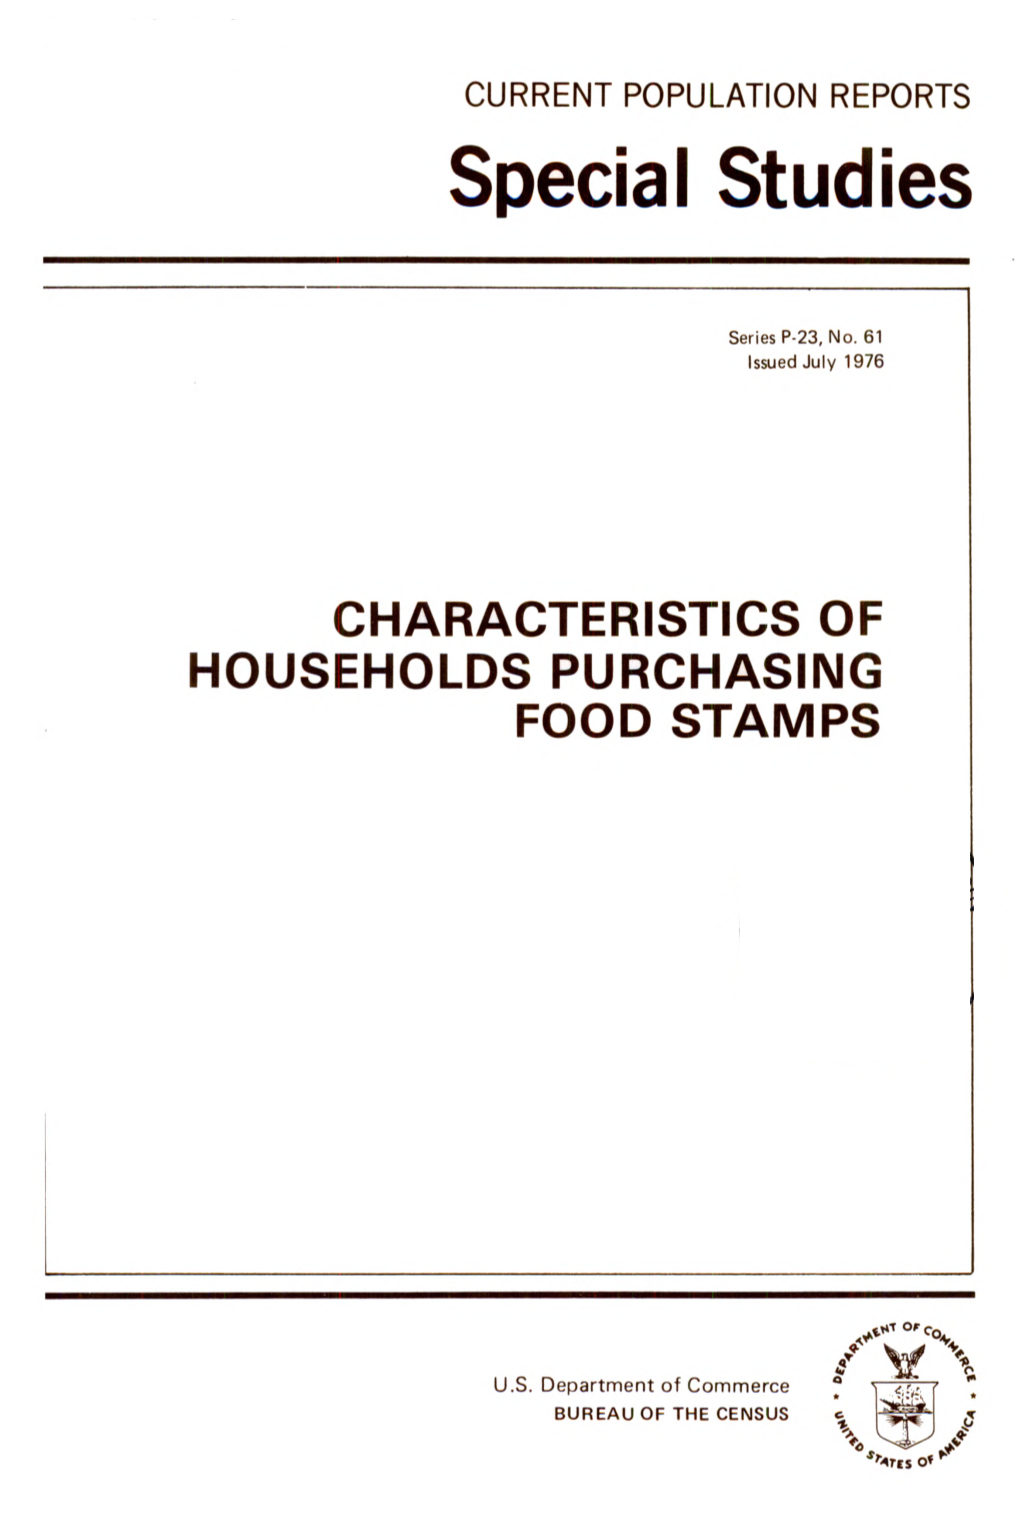 Characteristics of Households Purchasing Food Stamps